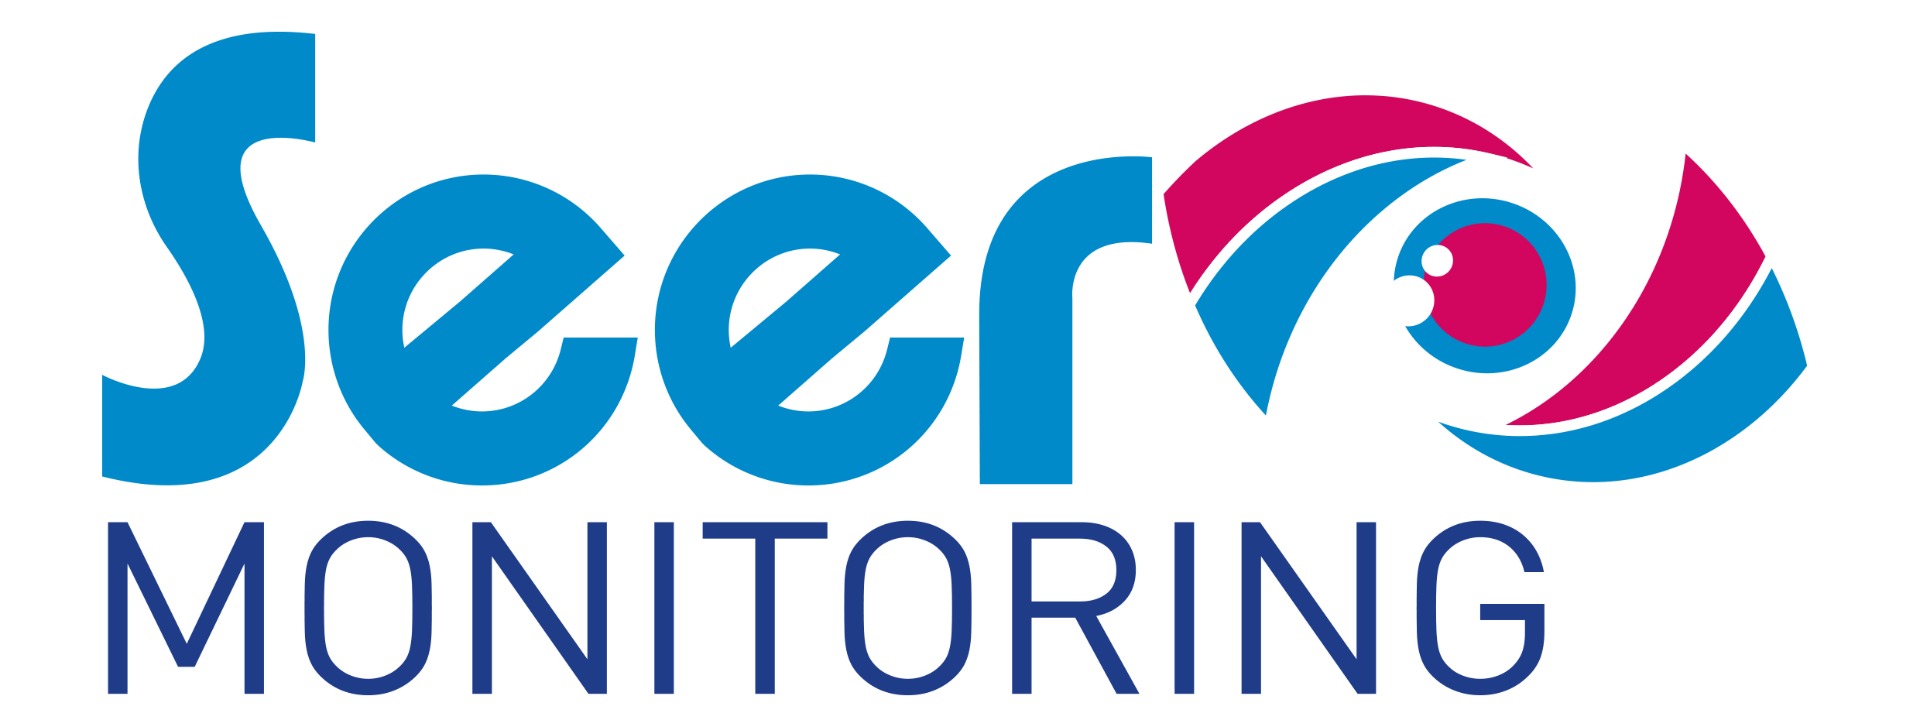 A blue and pink logo displaying SEER Monitoring, the logo for T-T's range of monitoring units.